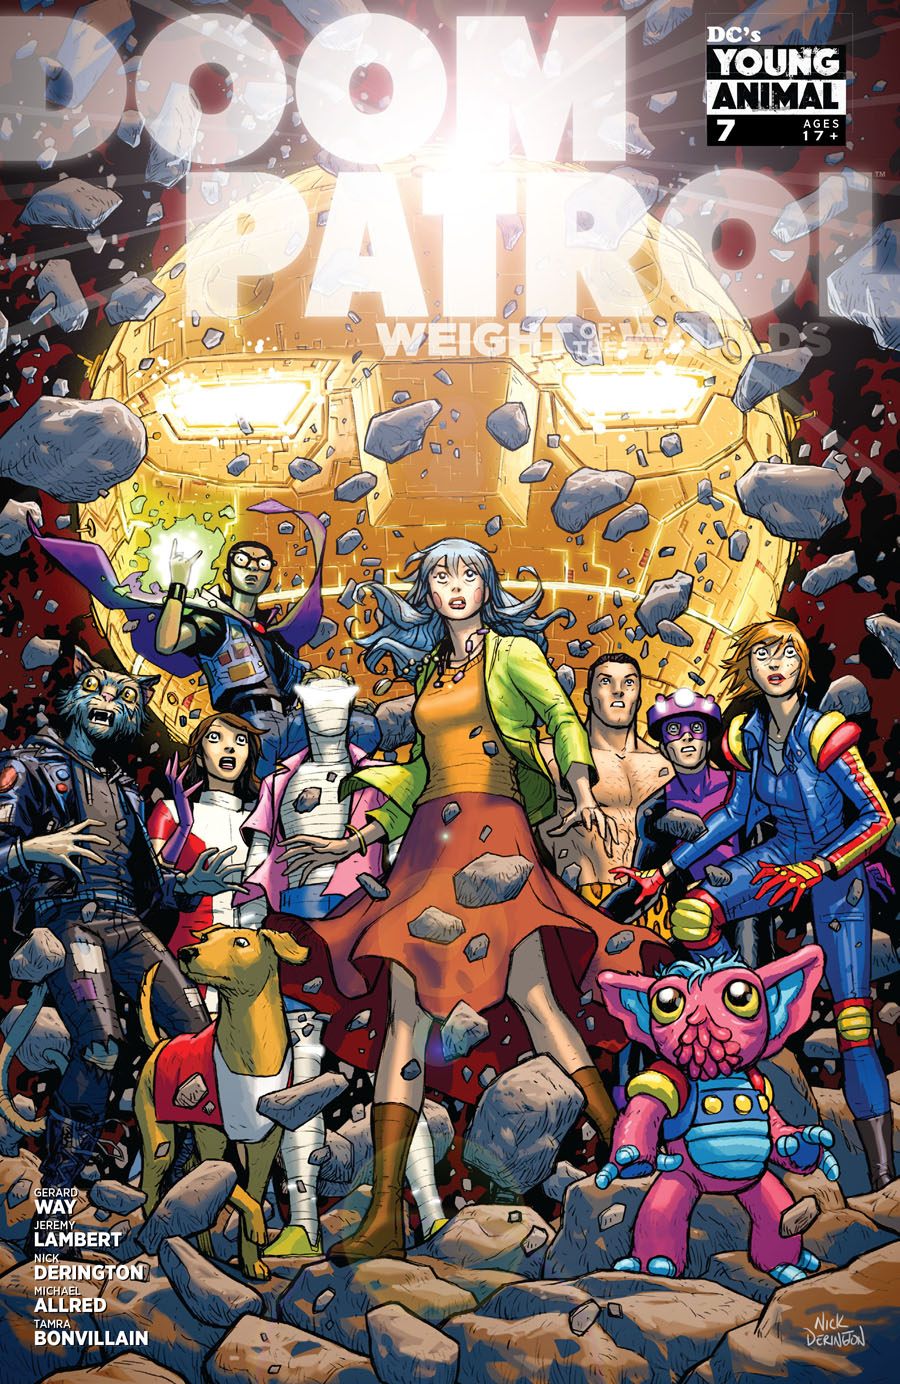 Doom Patrol: The Weight Of The Worlds #7 (2020)